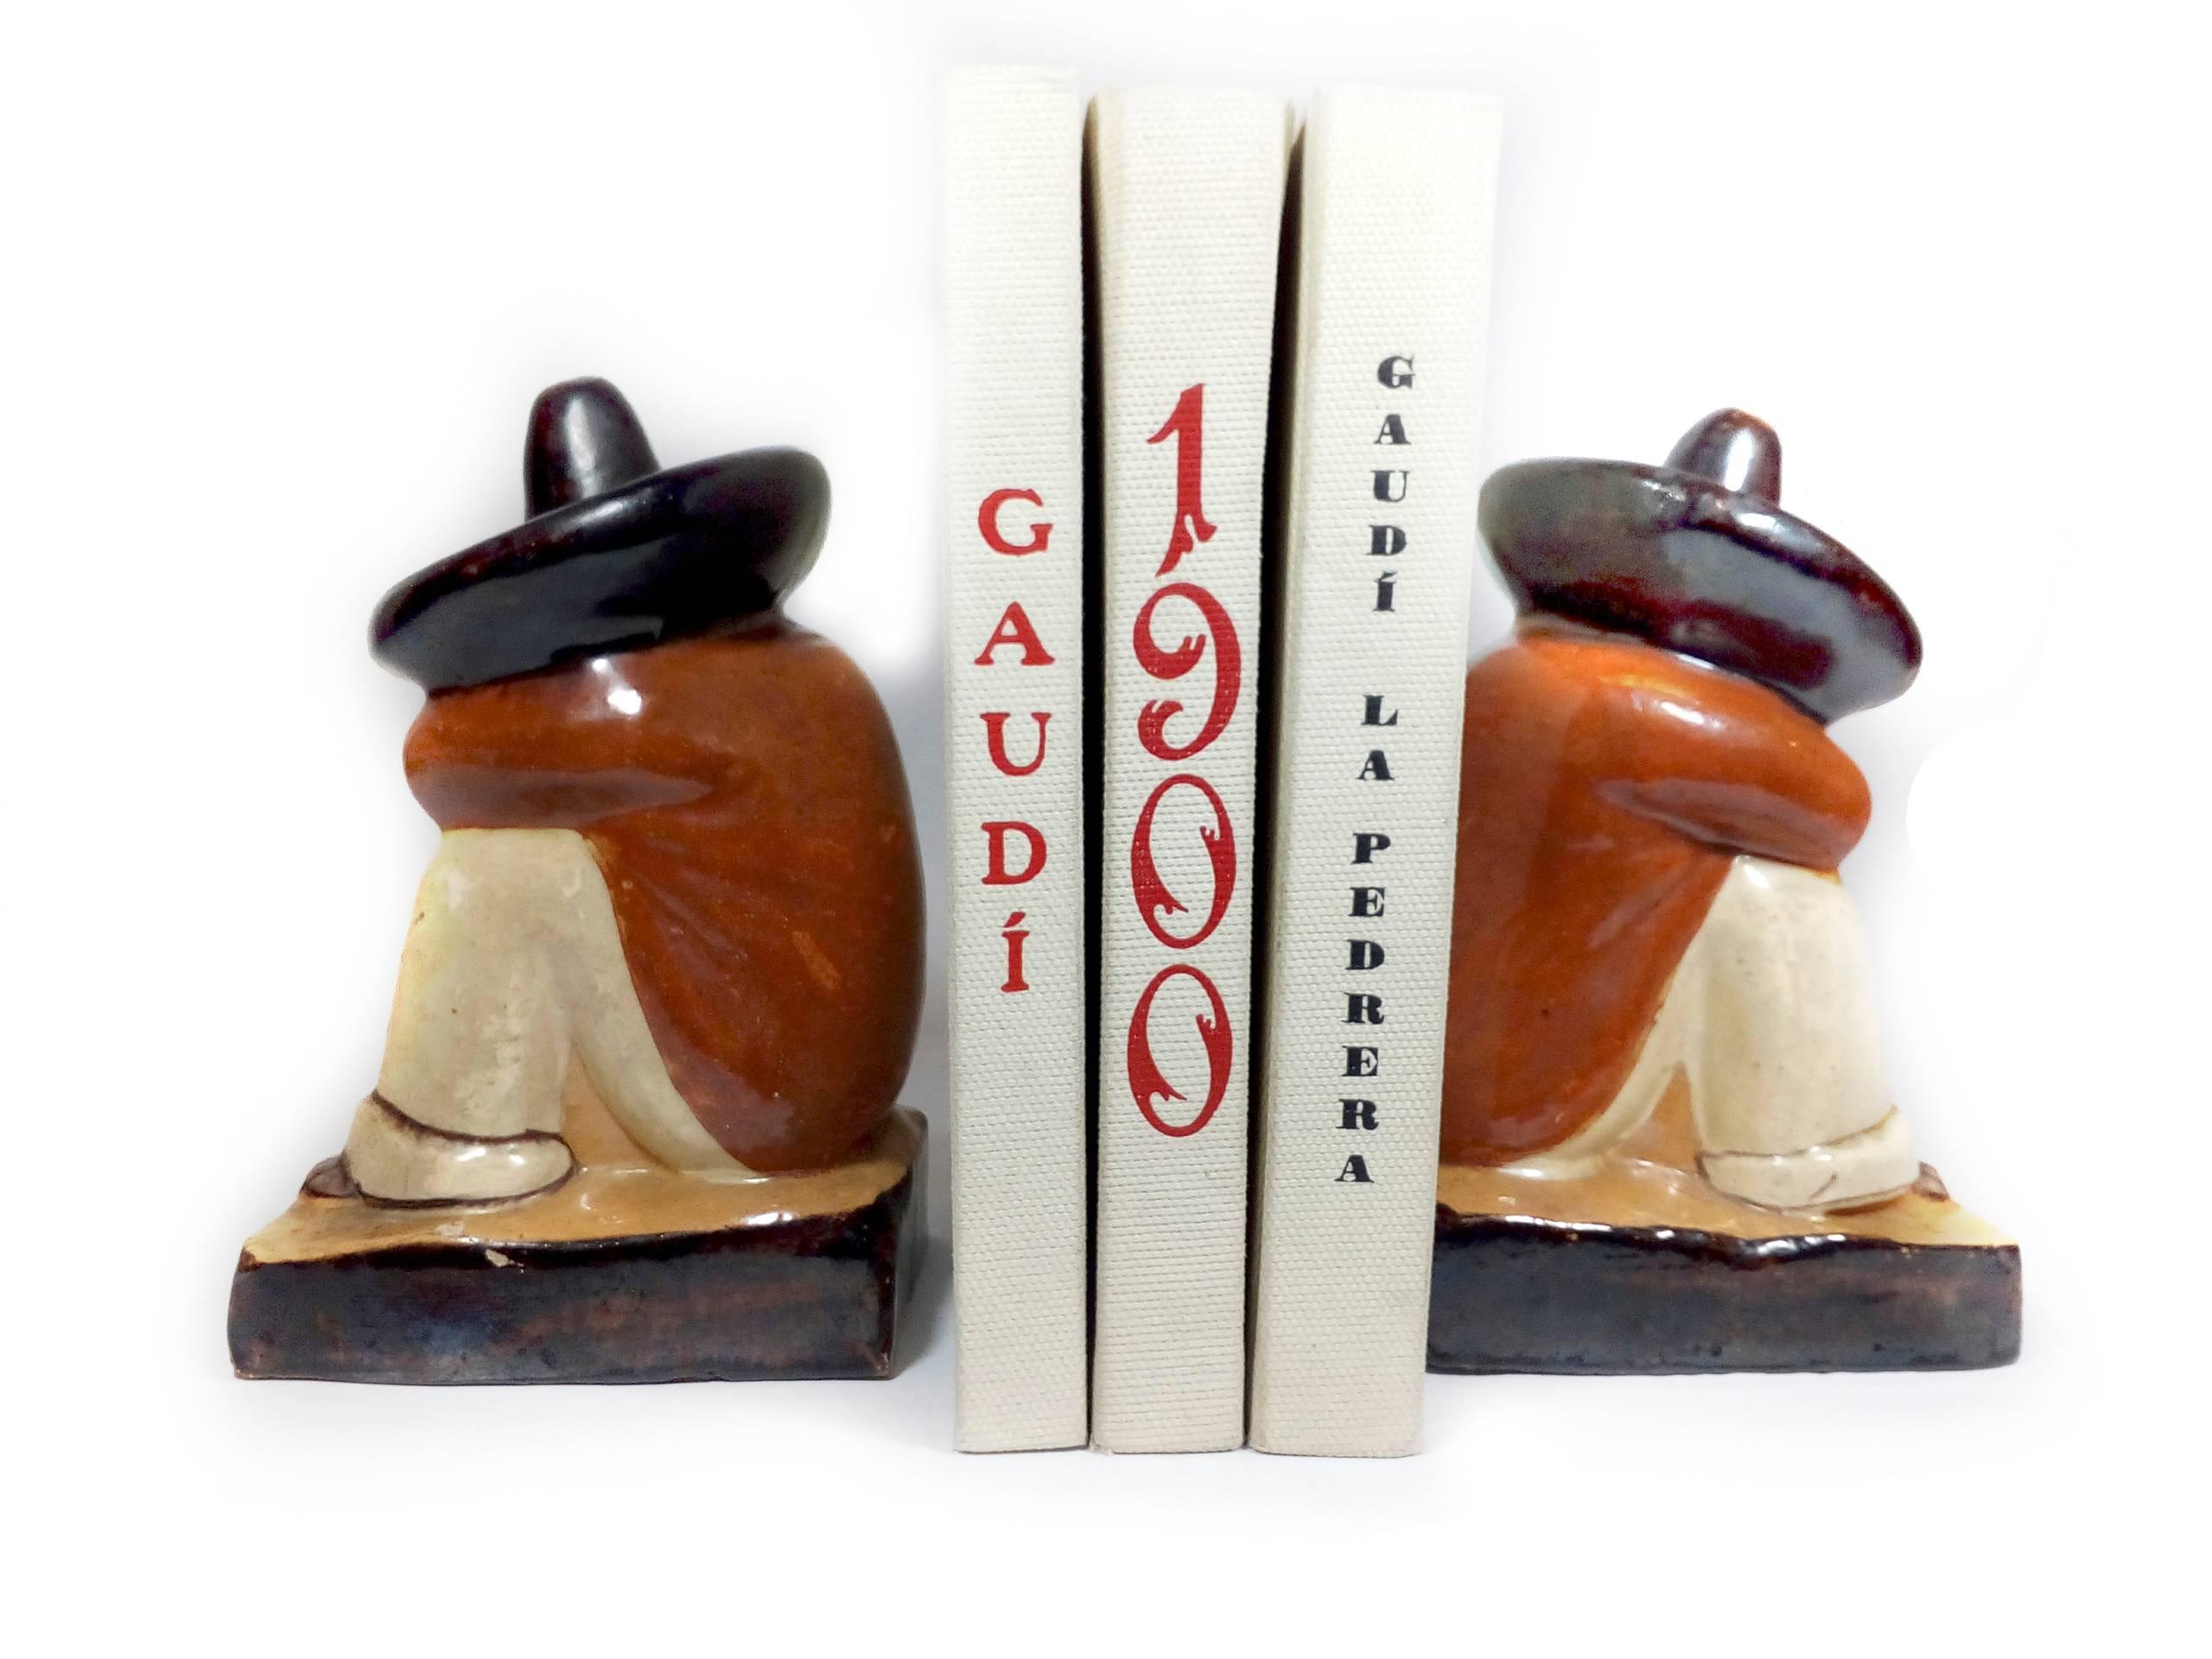 Pair of whimsical pottery bookends, made in Tlaquepaque, Jalisco, Mexico probably in the 1950s. The figures depict two sleeping men with large sombreros, hand painted in glazed colors. Tlaquepaque and Tonalá (both in the state of Jalisco) are two